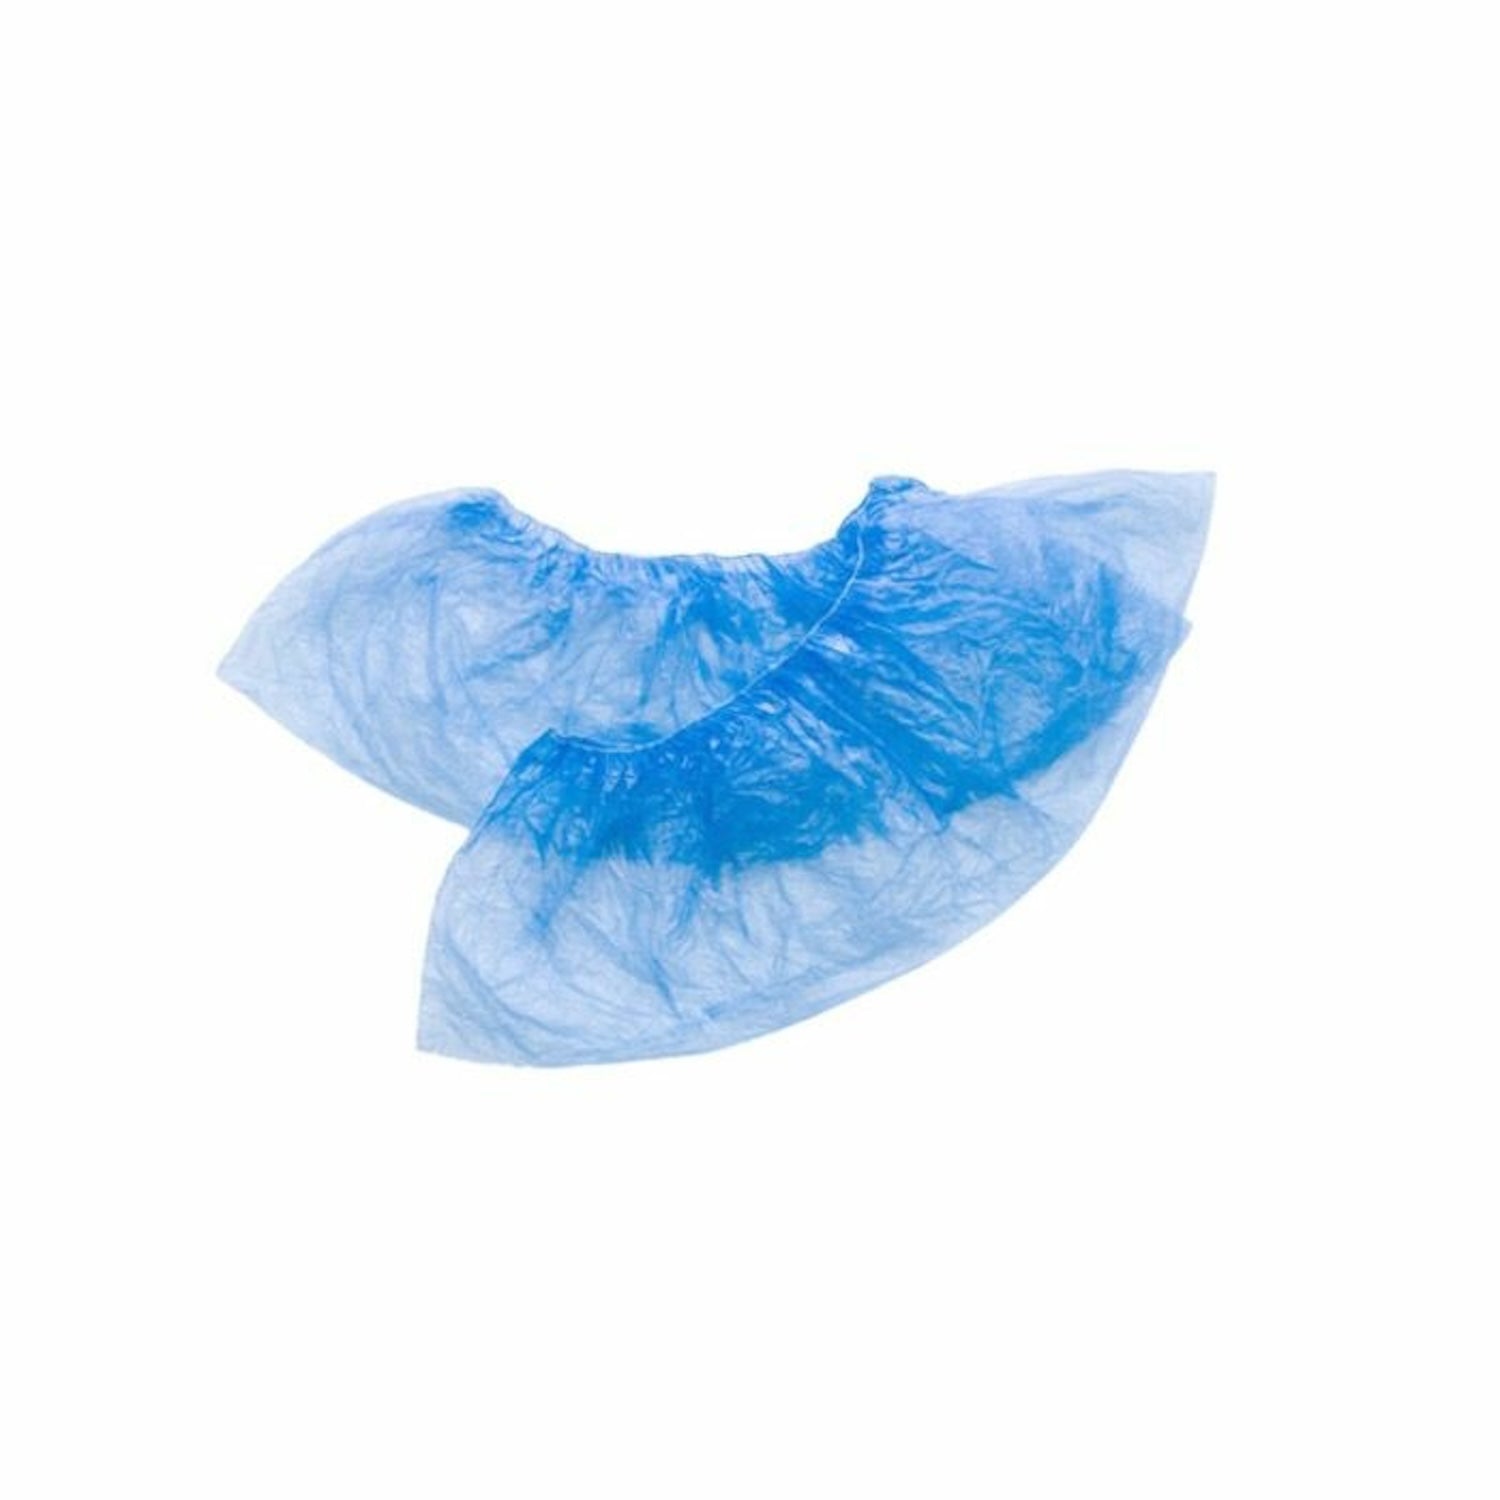 Premier Polythene Shoe Covers | Large | Pack of 100 (2)